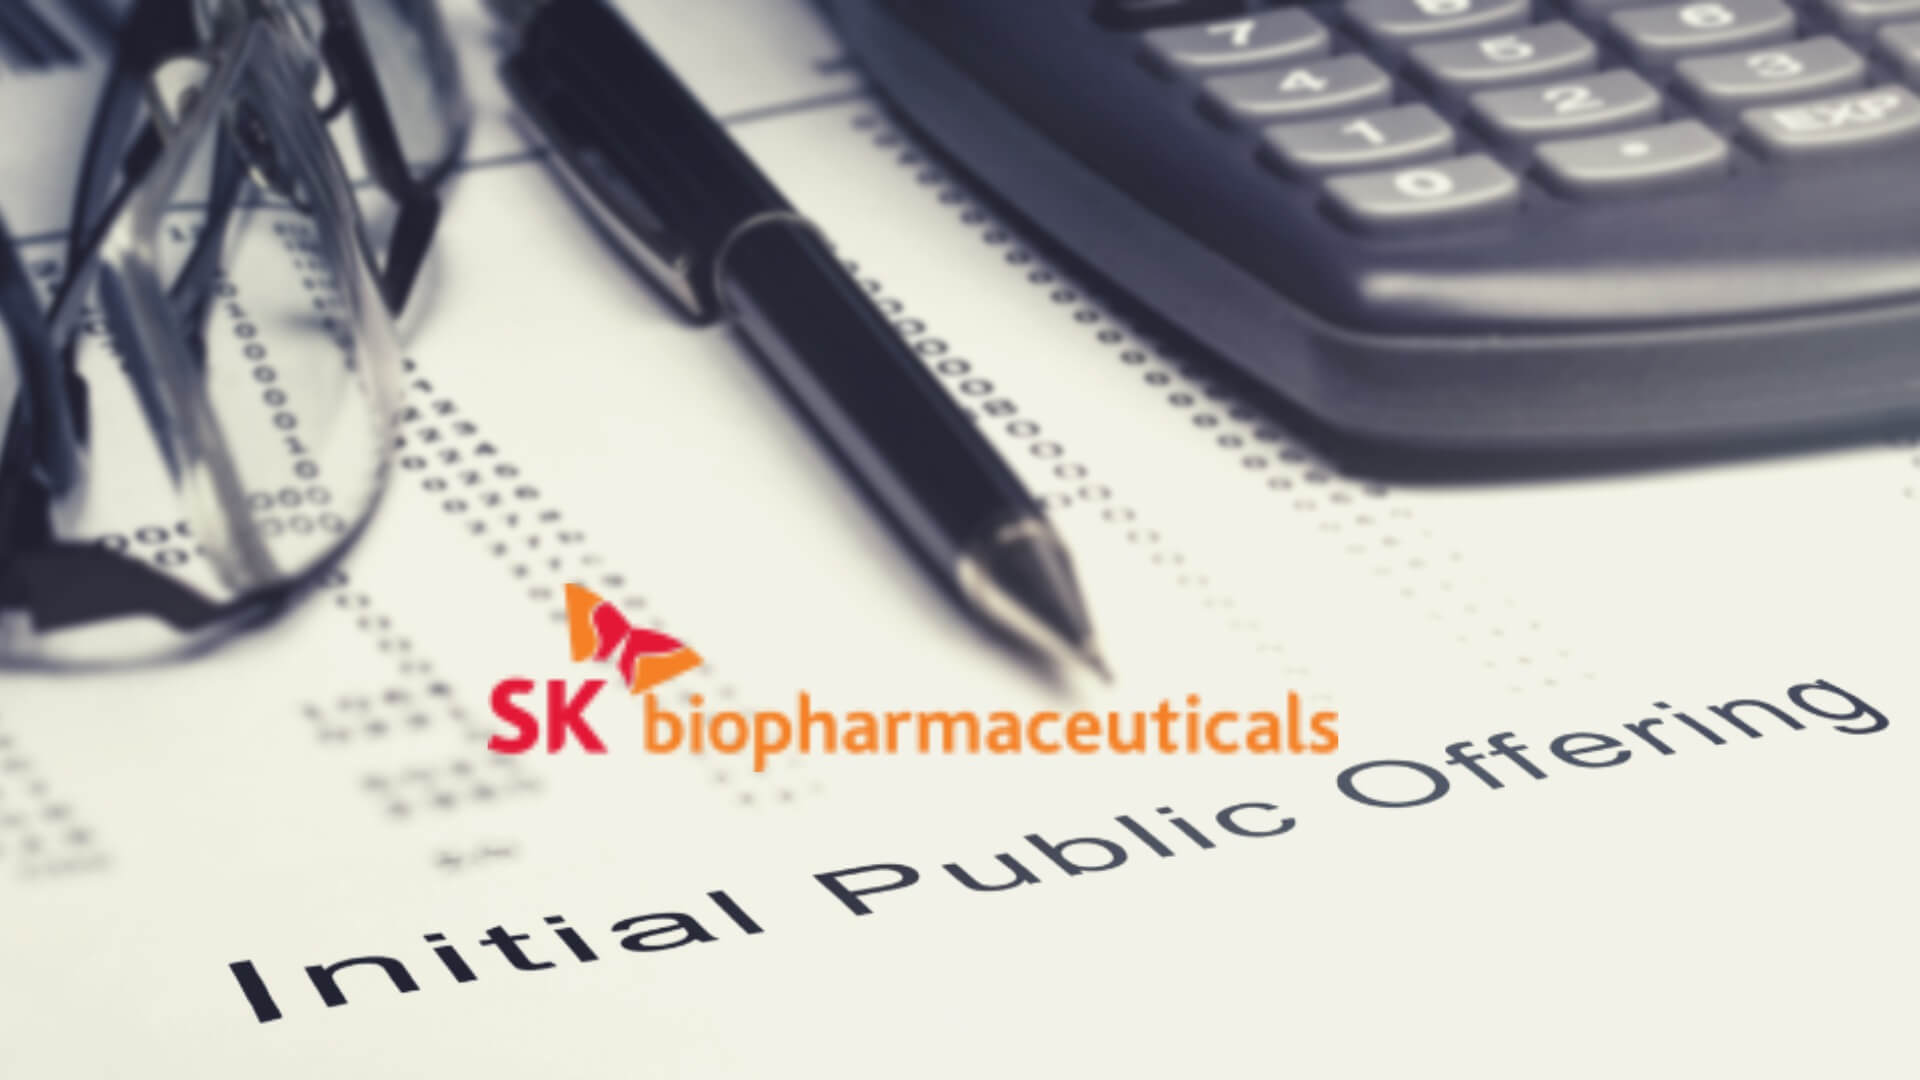 SK Biopharm to raise at least W5tr in IPO